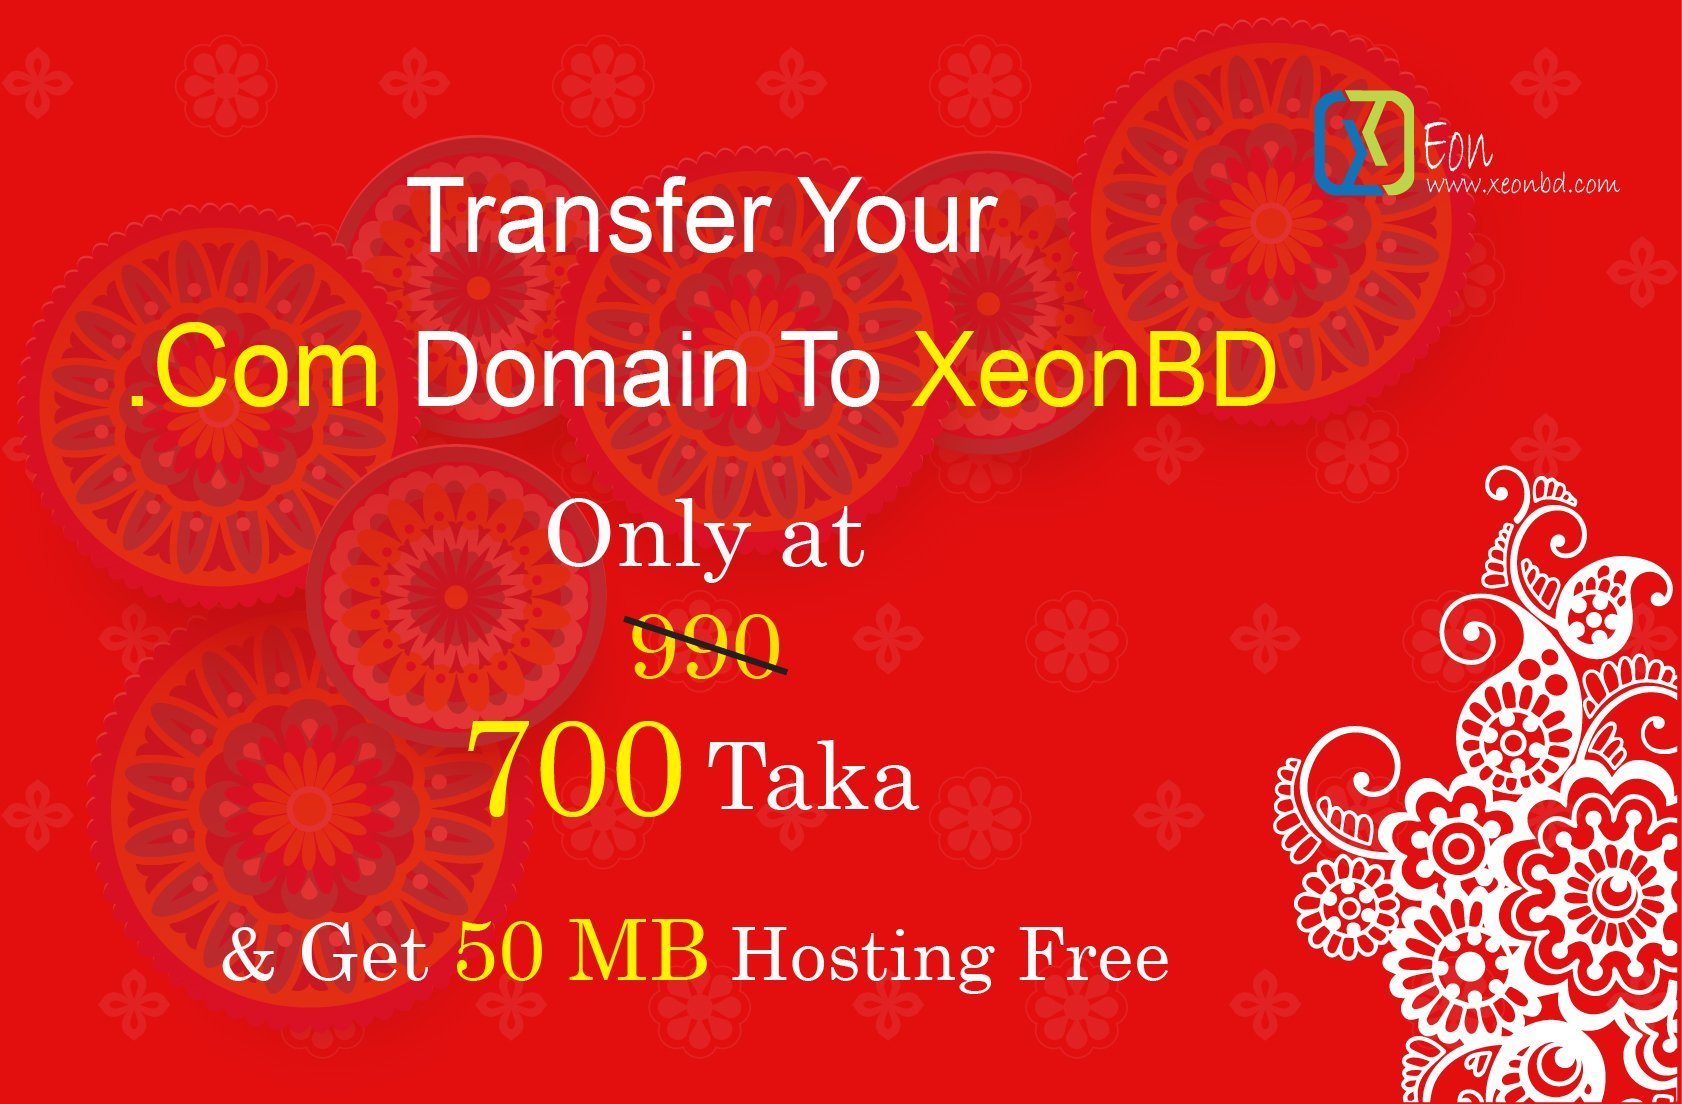 .COM domain transfer is now only BDT 700 & get 50MB SSD hosting free